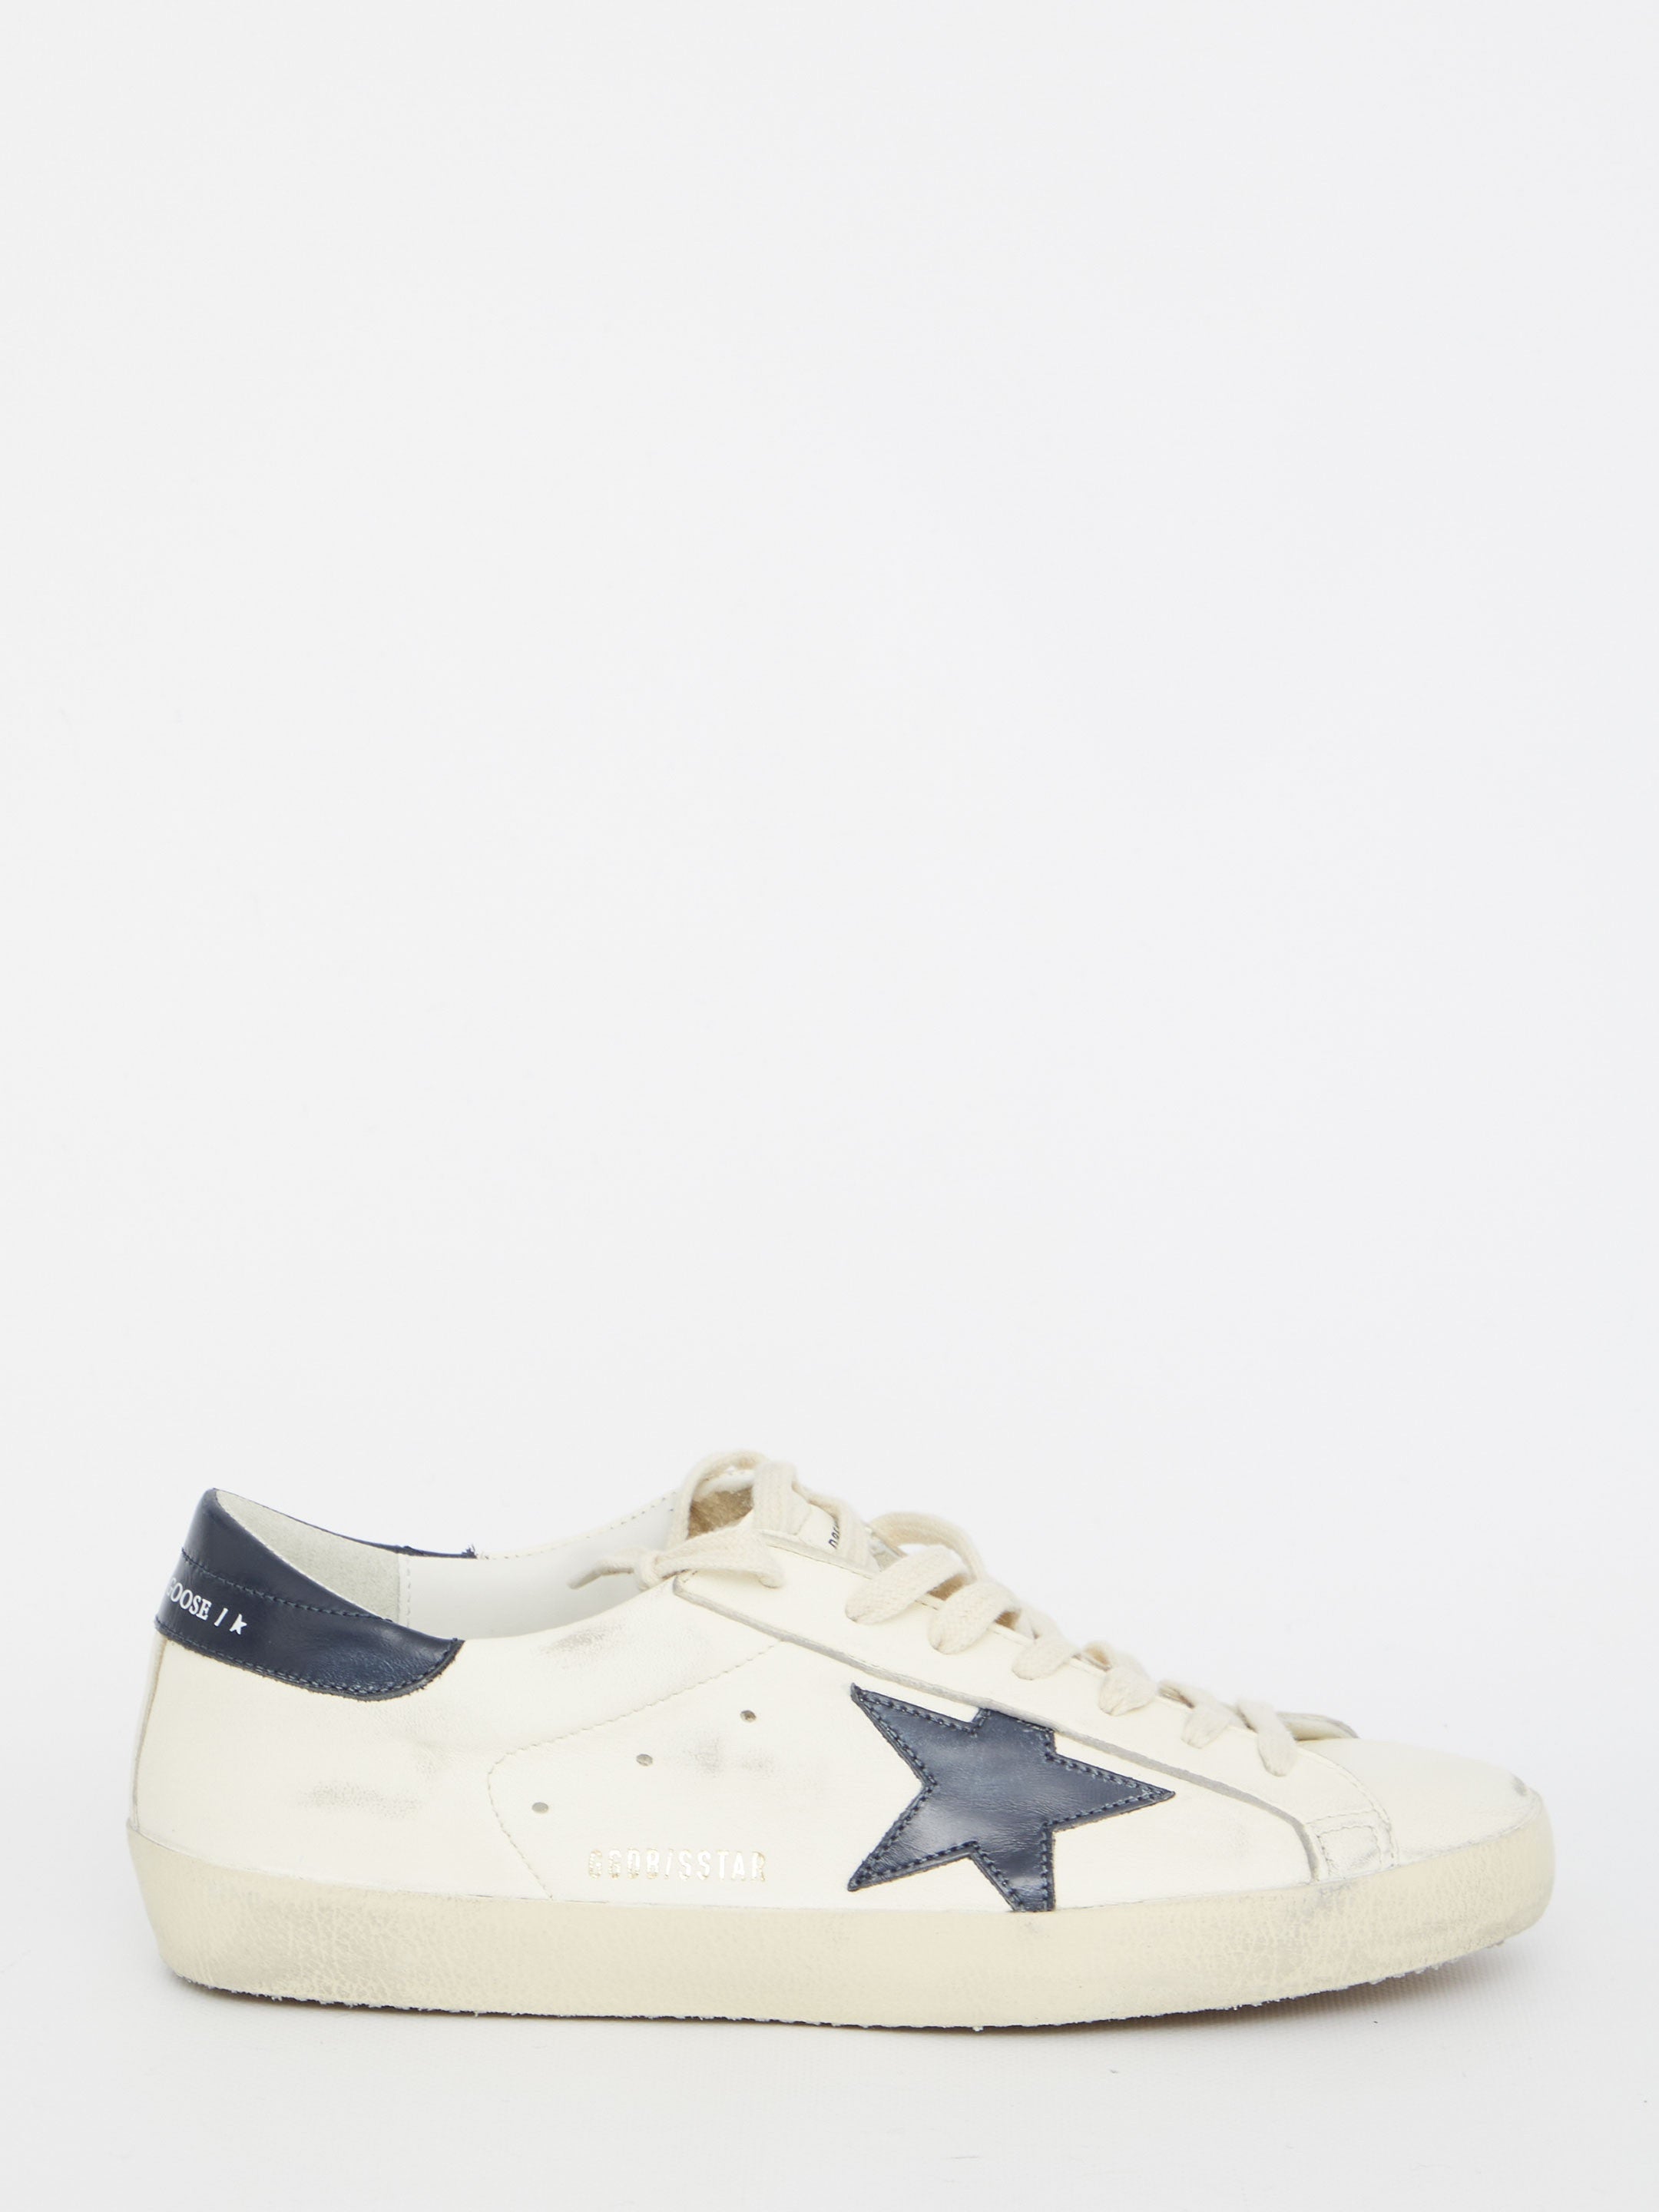 GOLDEN-GOOSE-OUTLET-SALE-Super-Star-sneakers-Sneakers-44-BEIGE-ARCHIVE-COLLECTION.jpg